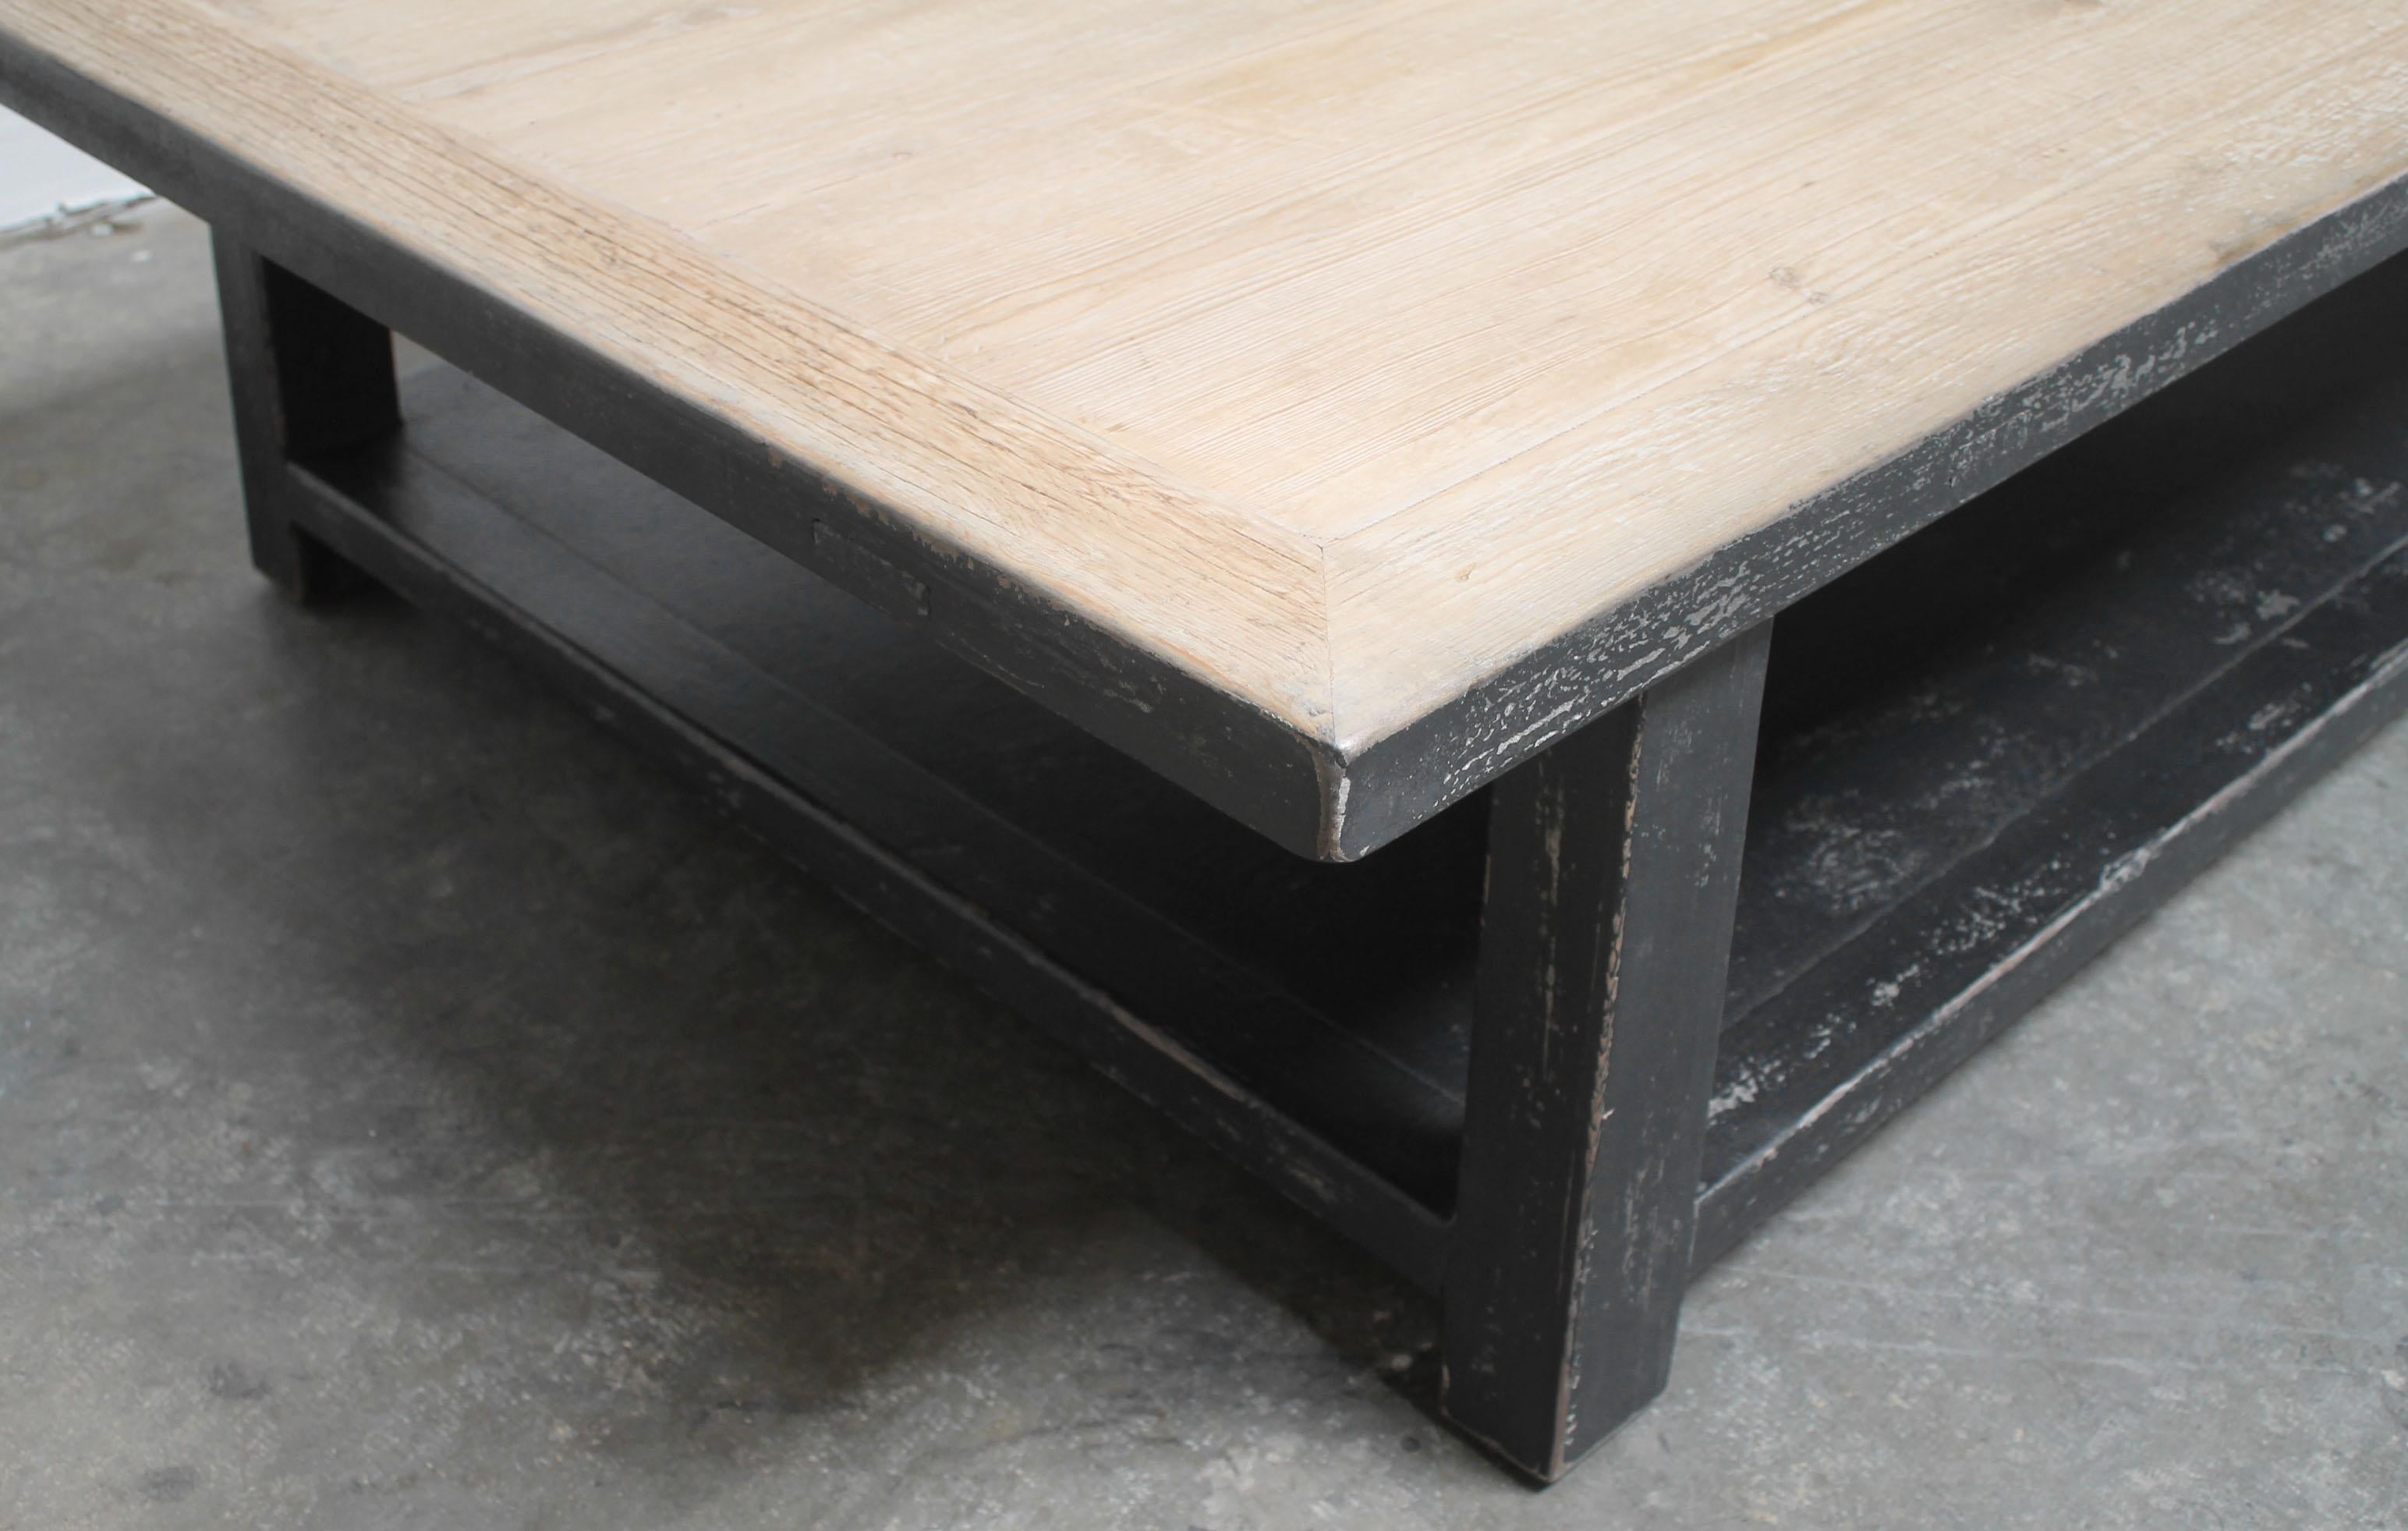 Contemporary Large Reclaimed Pine Wood Coffee Table with Distressed Black Finish